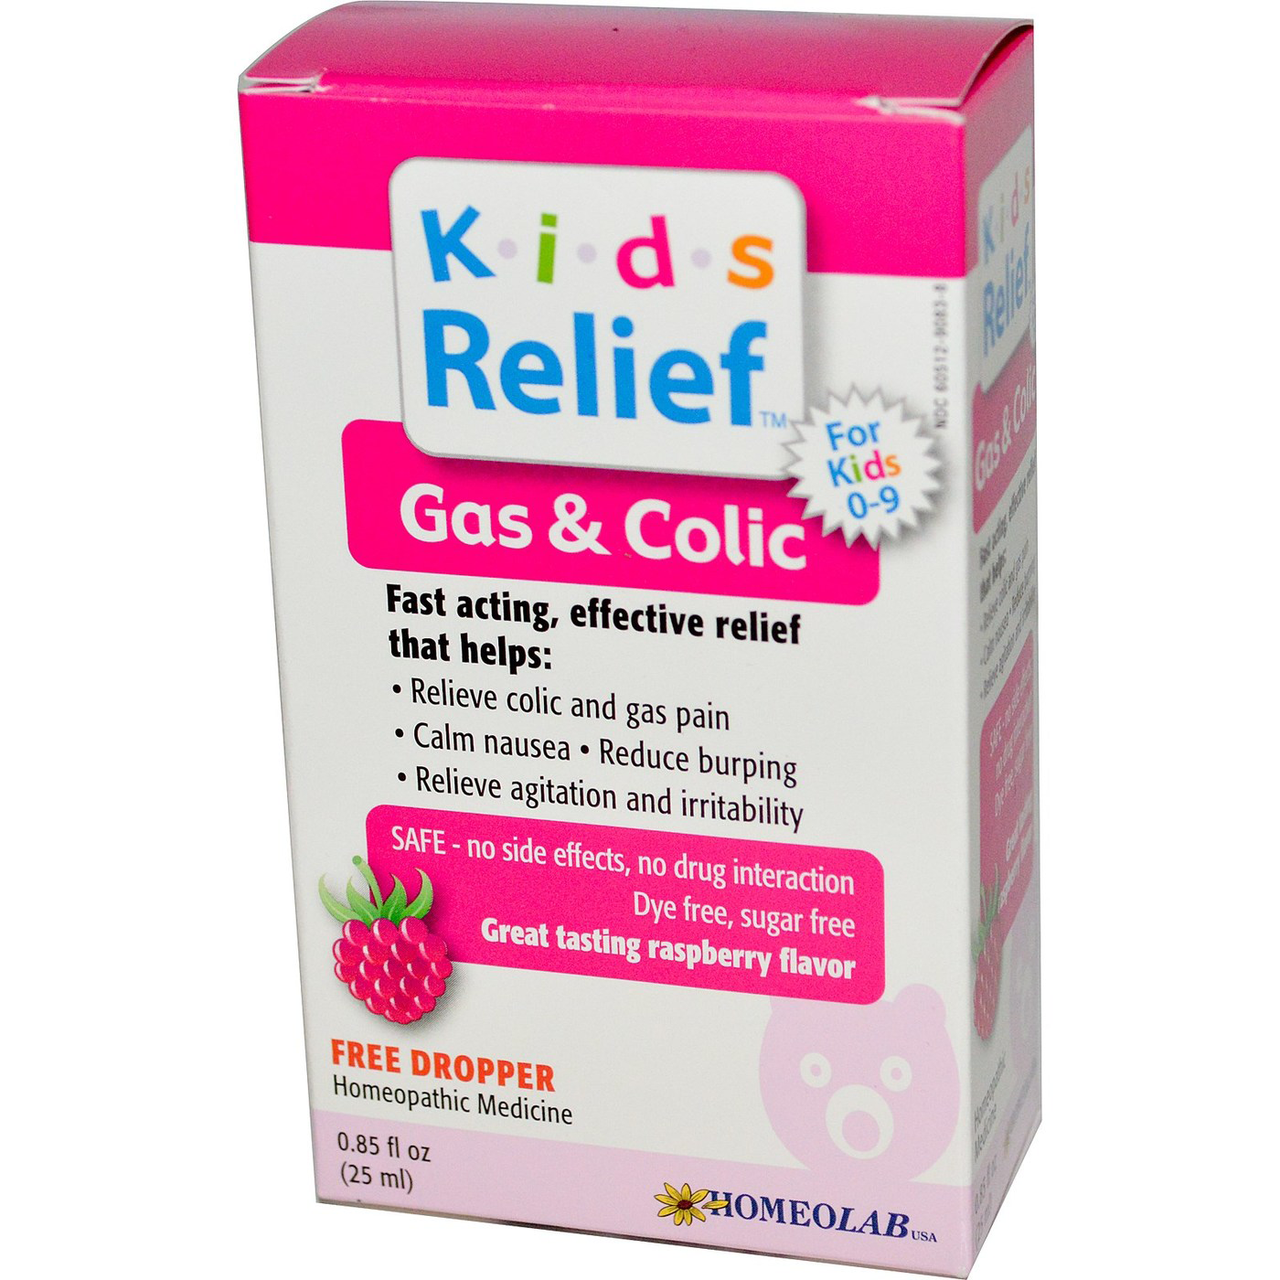 Gas & Colic - Kids Relief